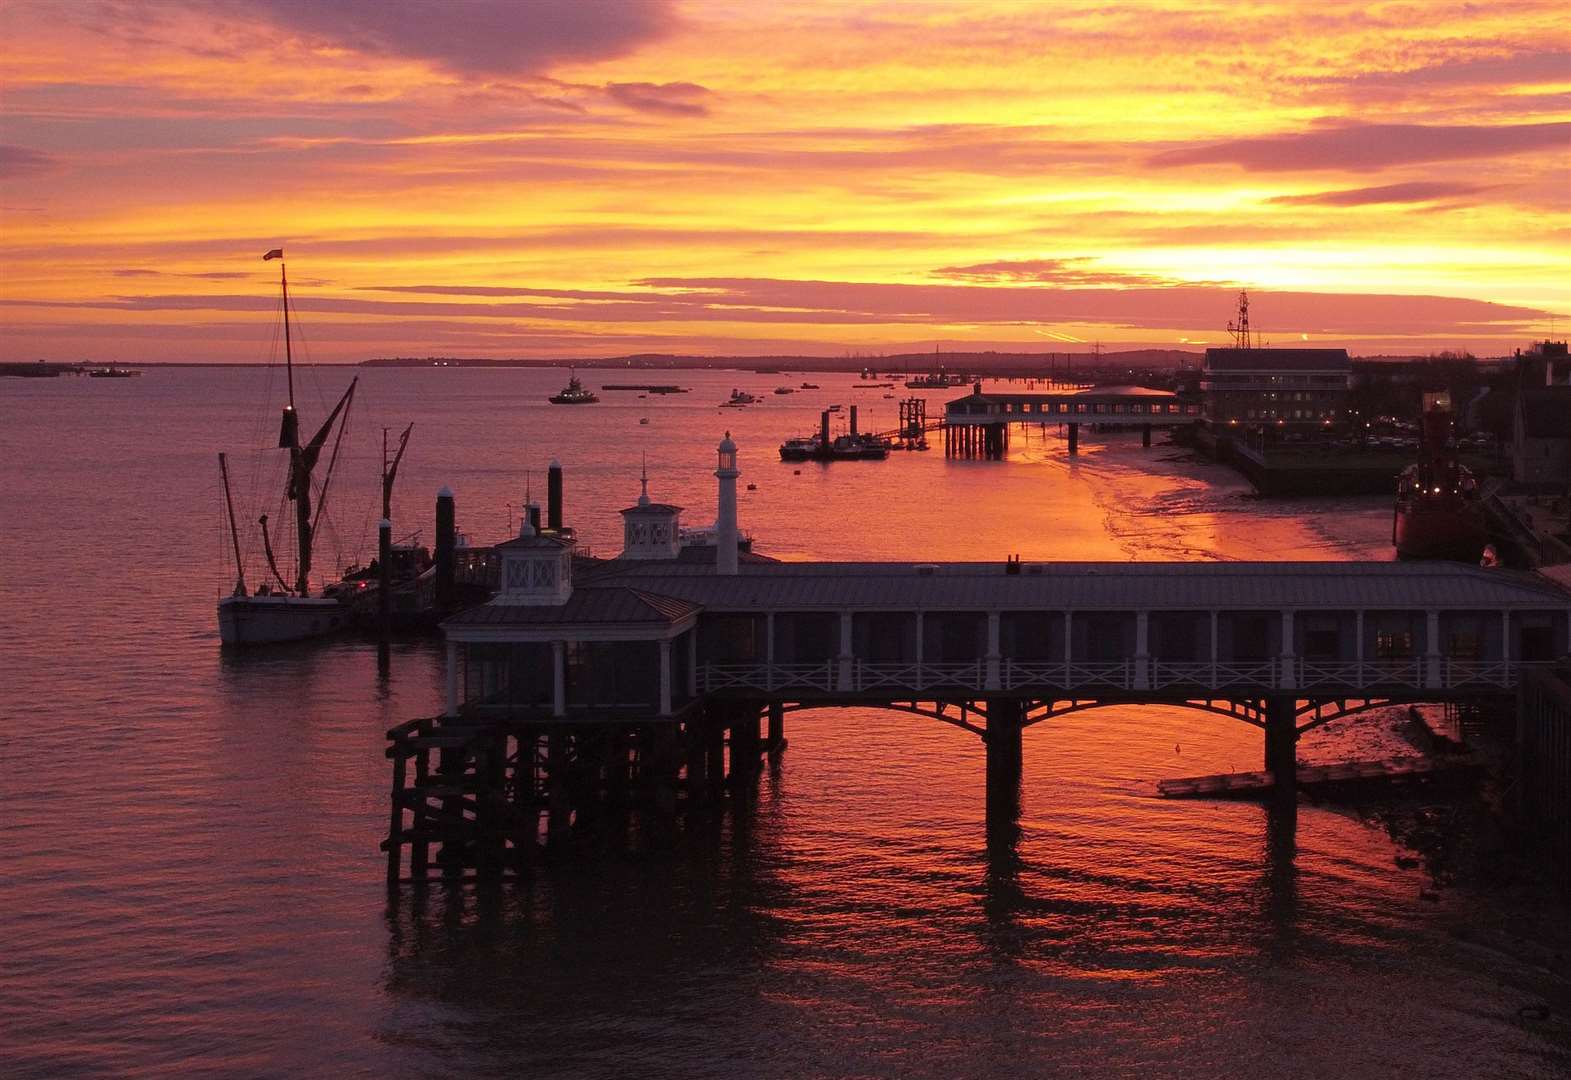 Town's pier to be sold by council